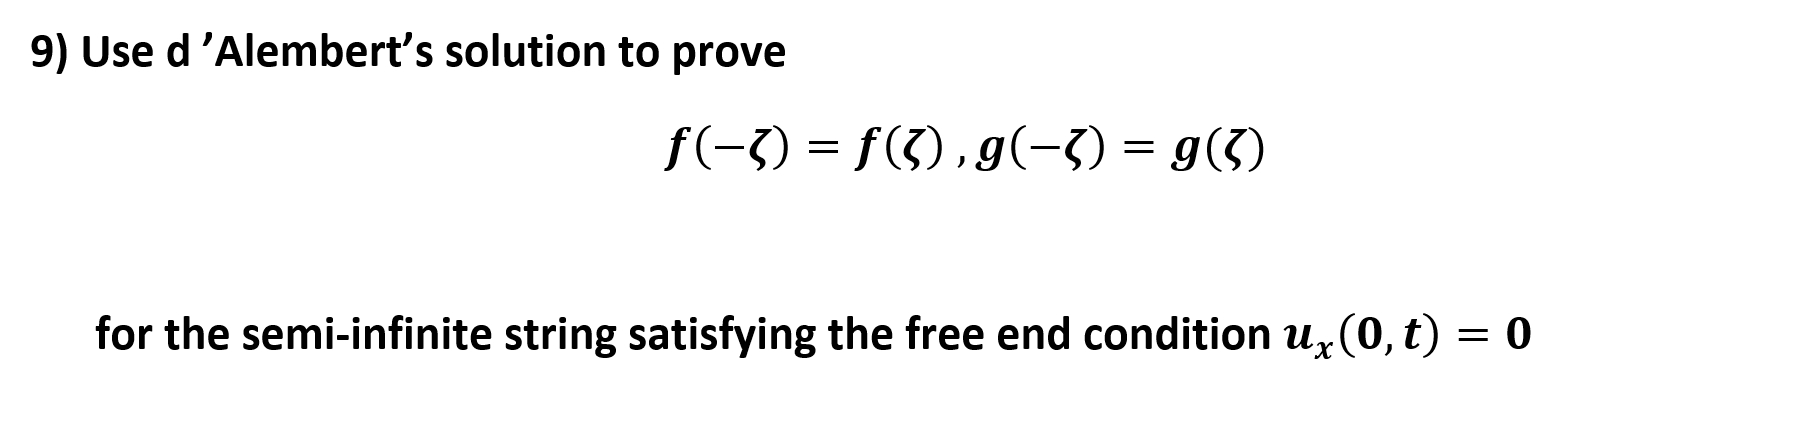 Use d'Alembert's solution to prove
f(-3) = f(3),g(-7) = g(3)
for the semi-infinite string satisfying the free end condition uz(0,t) = 0
